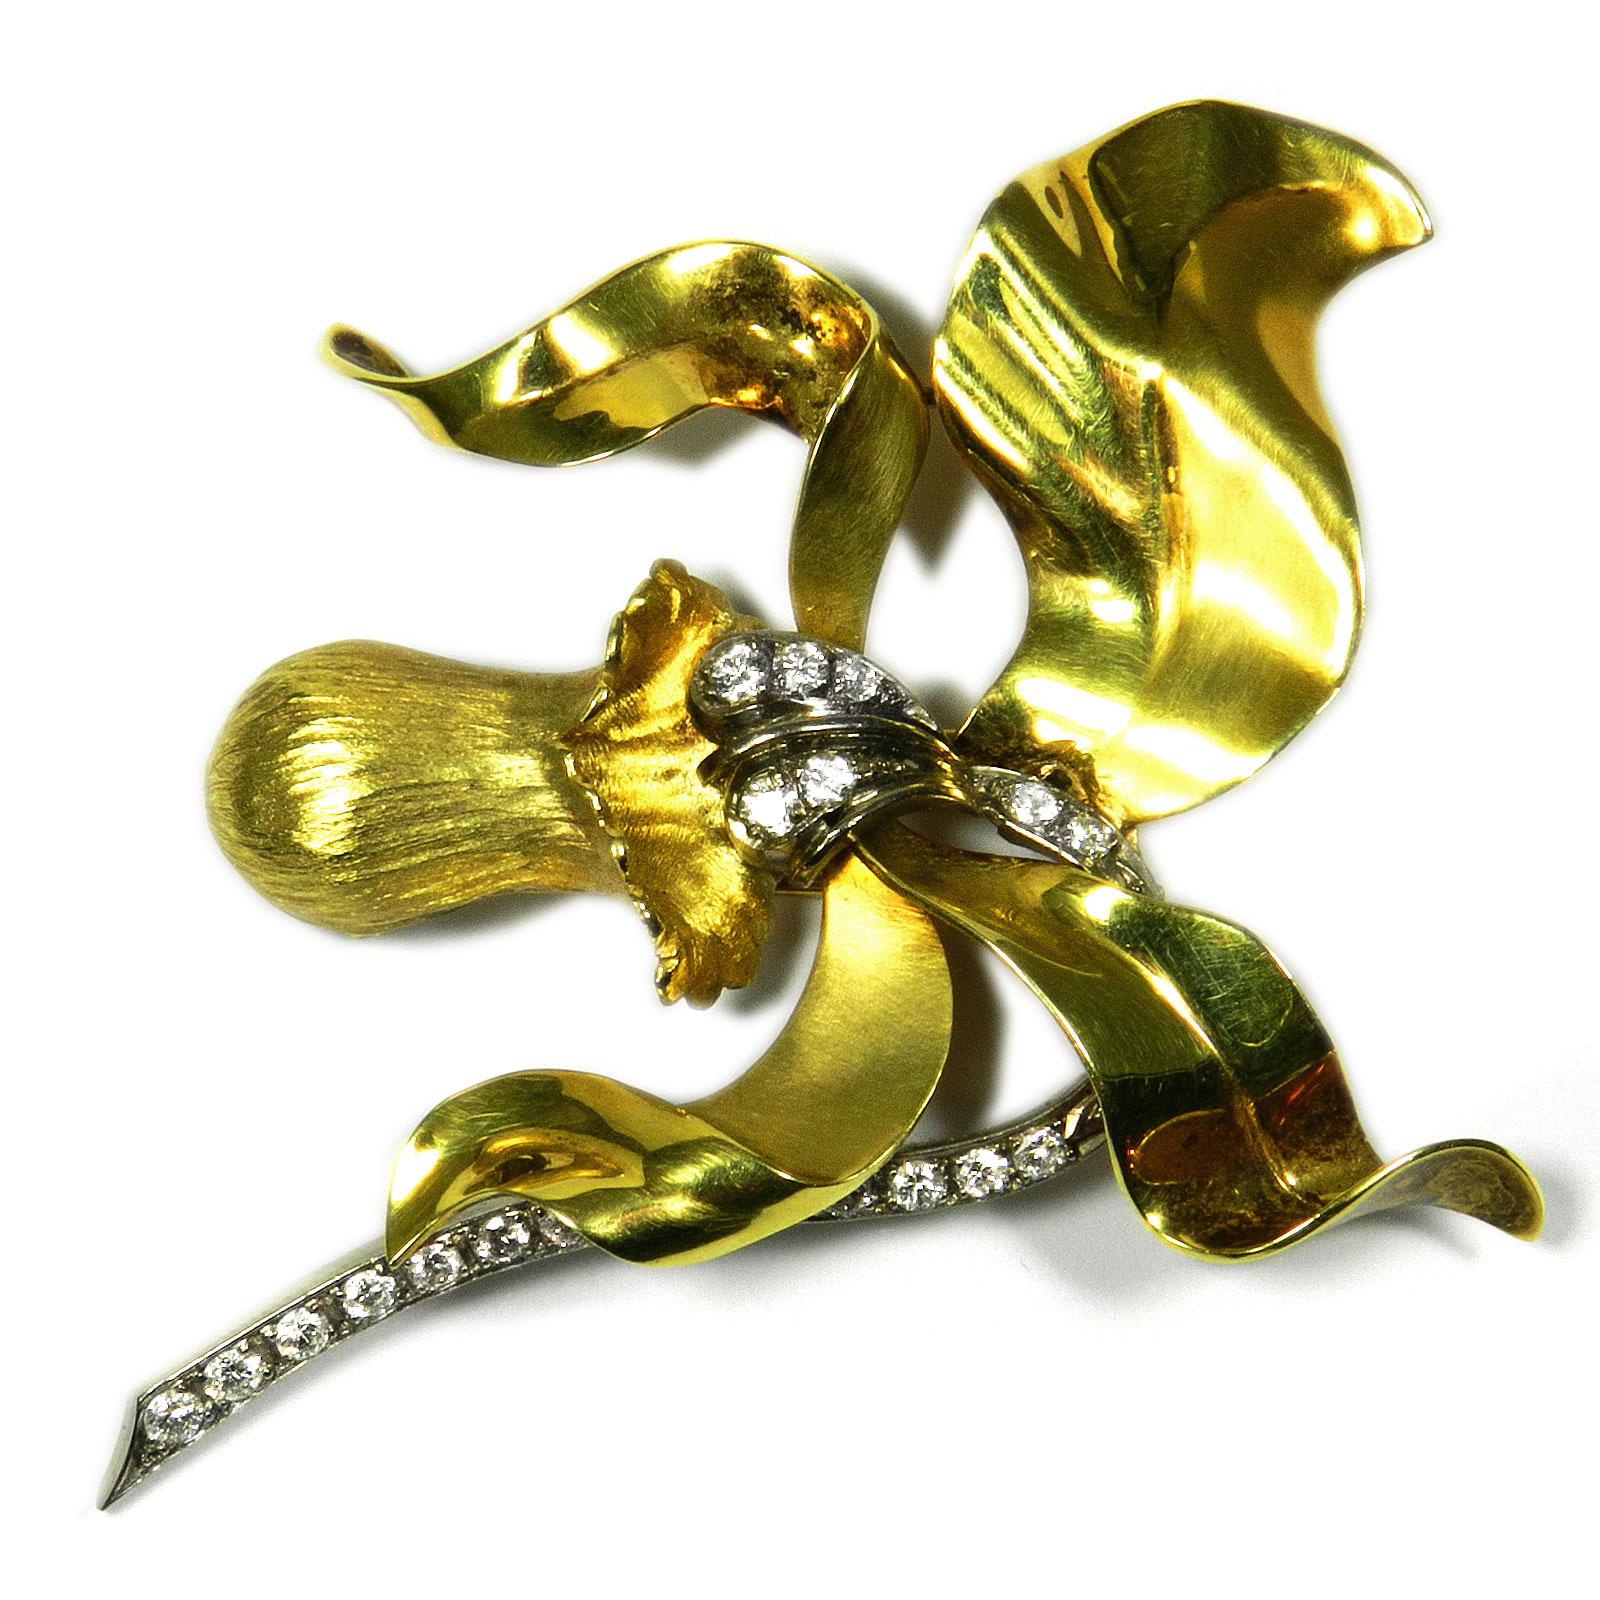 Signed Retro diamond gold orchid clip brooch circa 1950

This decorative clip brooch of impressive size is designed as a vivid orchid blossom, set with sparkling diamonds. The diamonds totaling approximately 0.85 carat, mounted in white gold. Signed